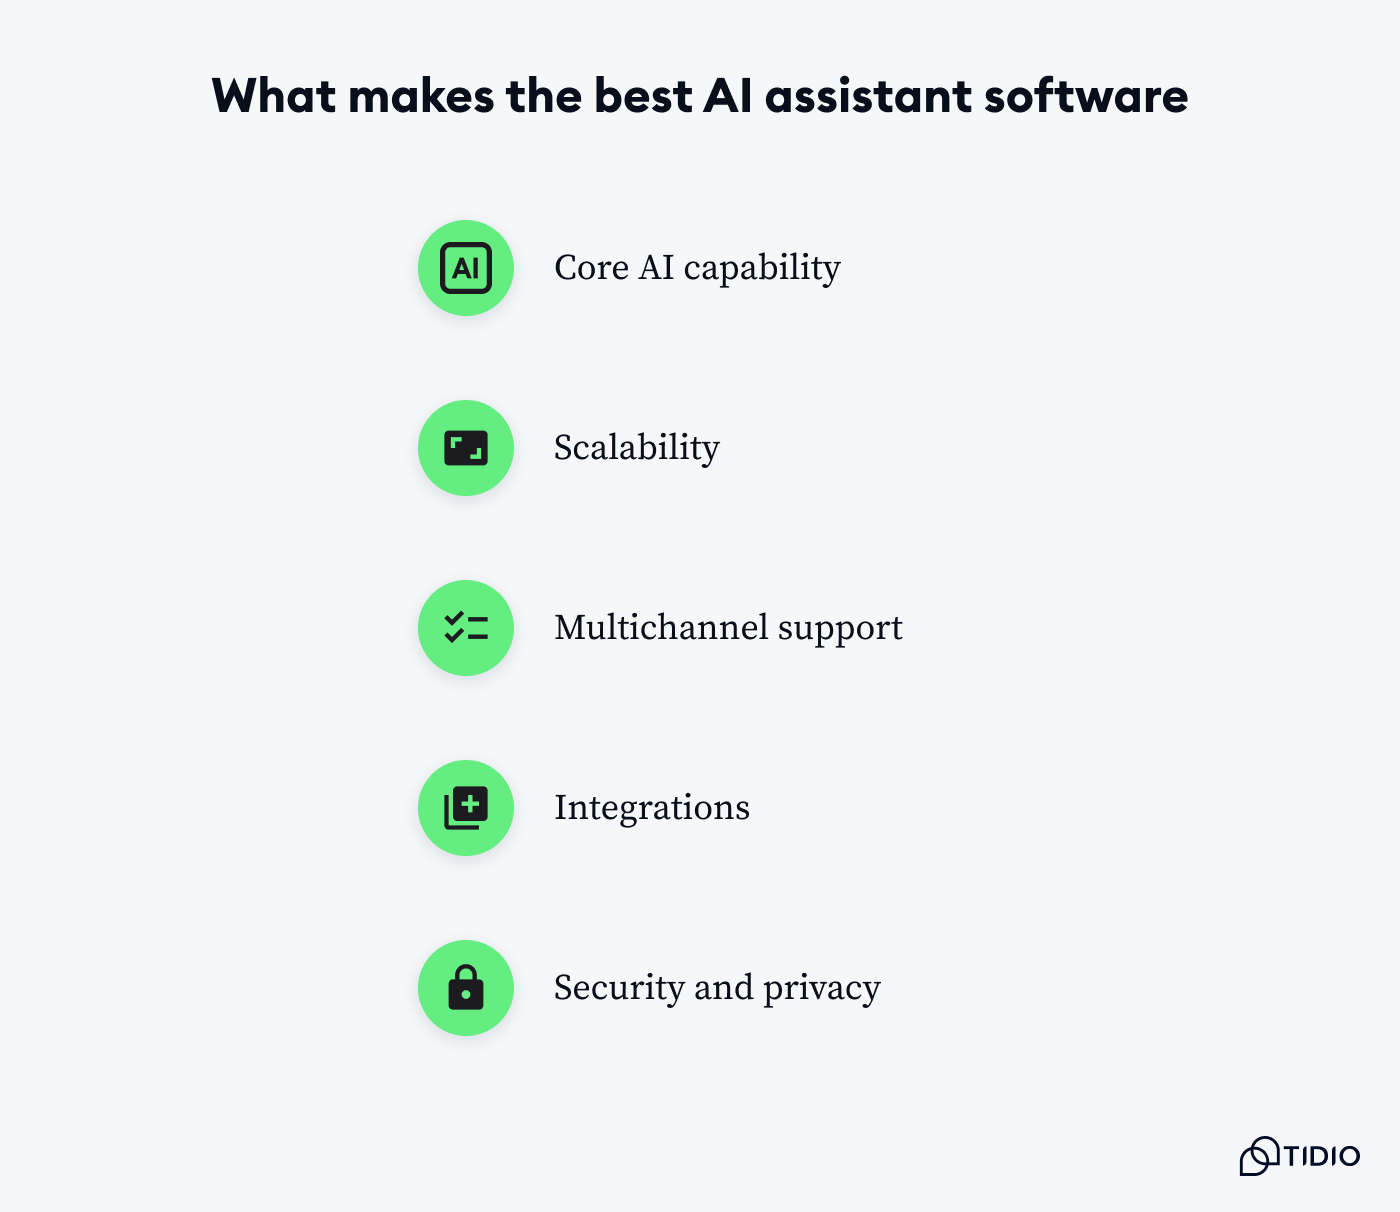 What makes the best AI assistant software?